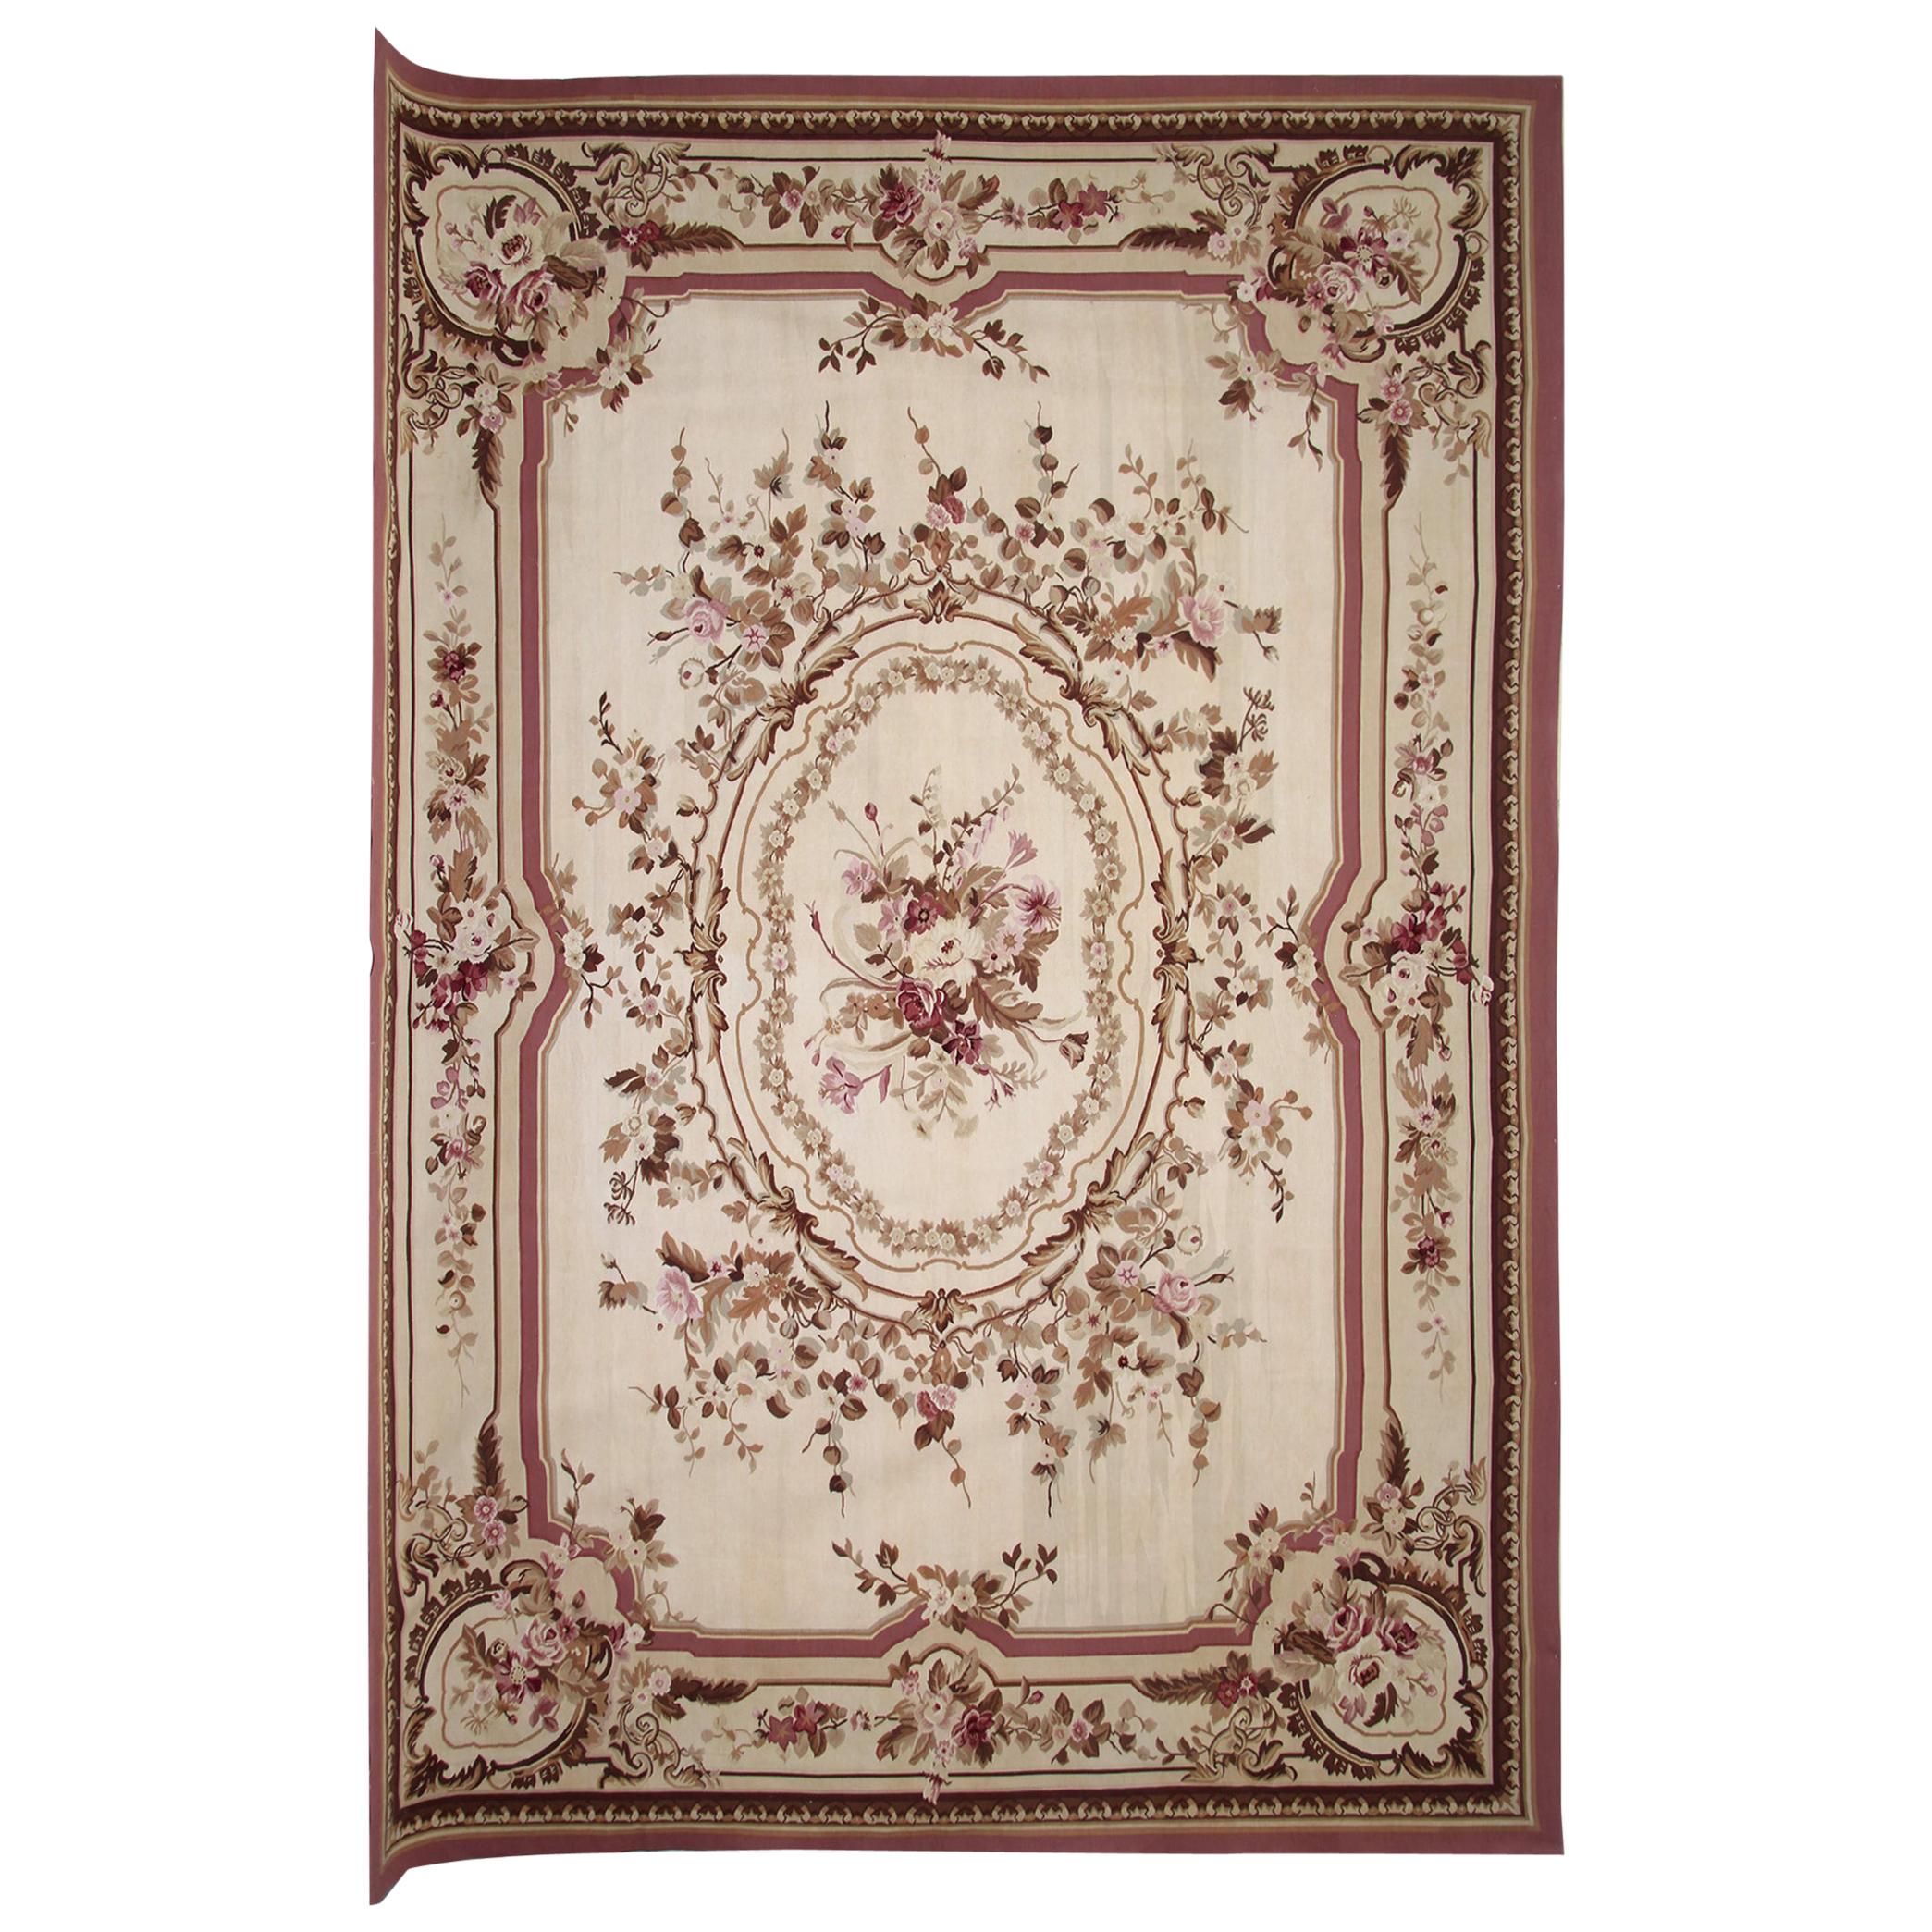 Handwoven Floral Needlepoint, Flat-Weave Aubusson Style Tapestry, Wall Hanging